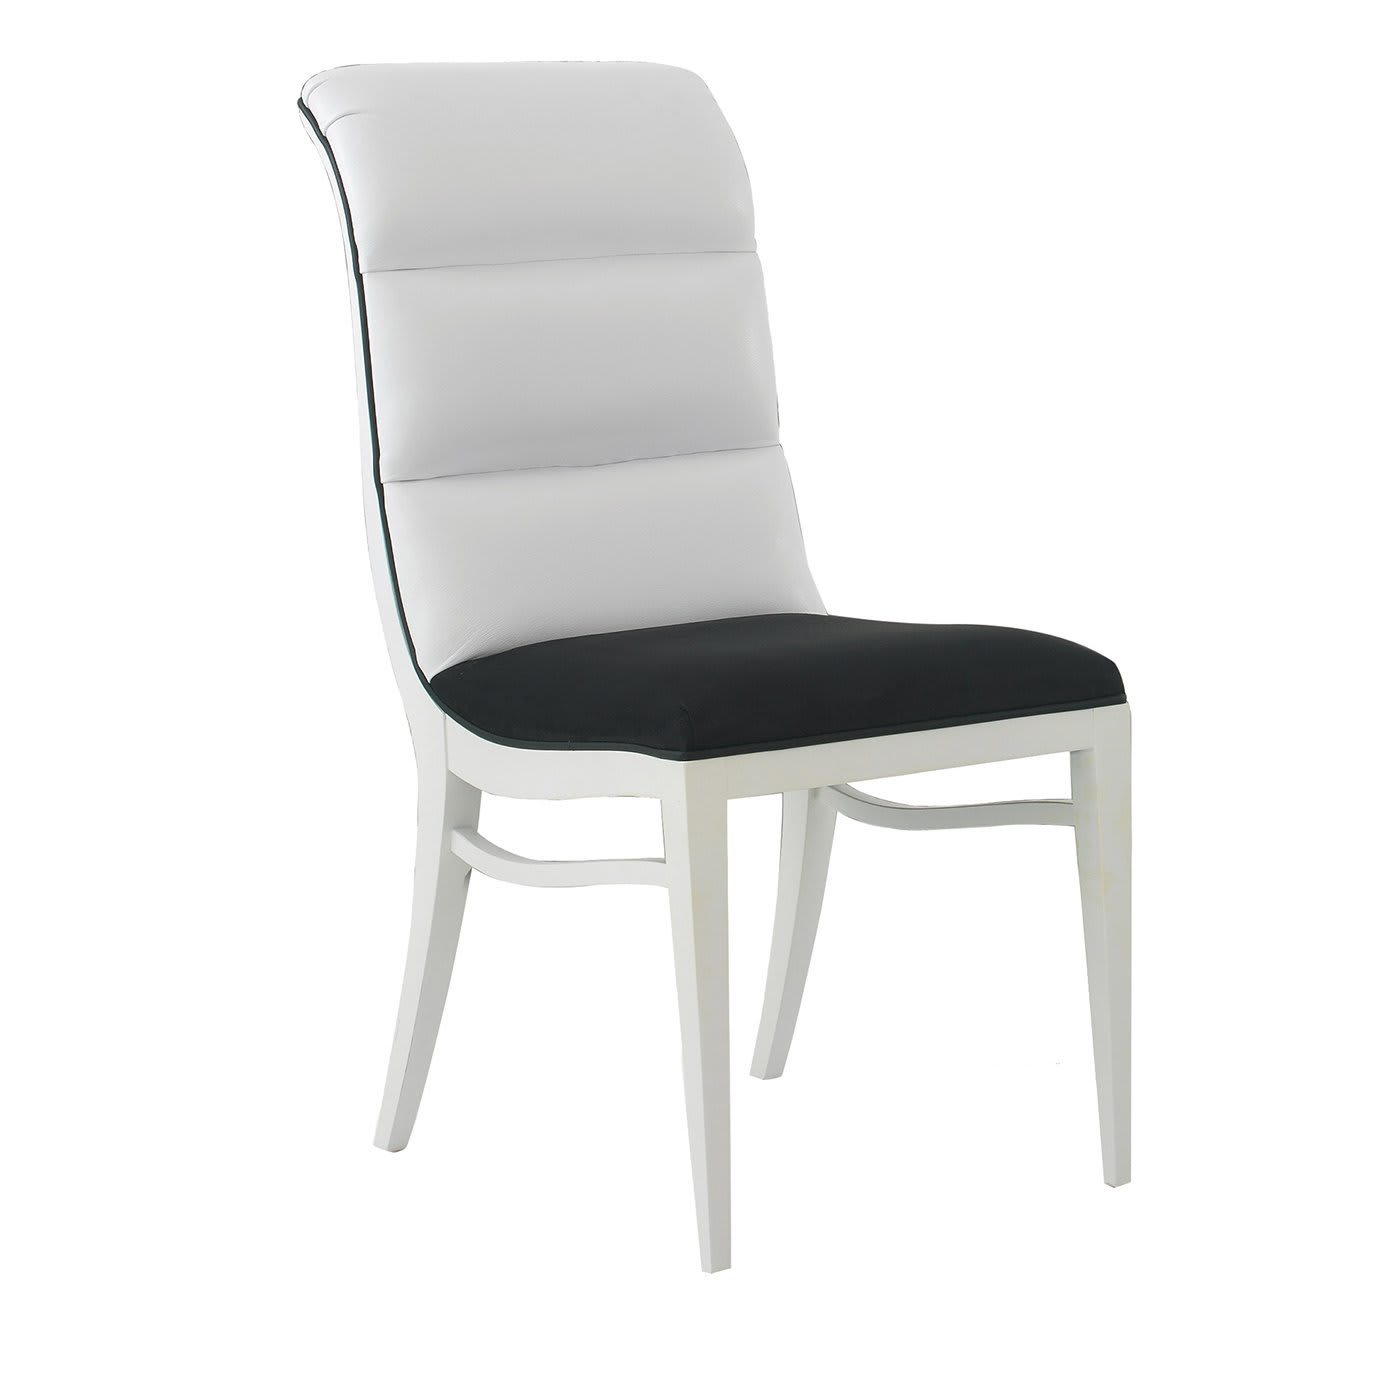 Set of 2 Black-And-White Chairs #1 - Palmobili